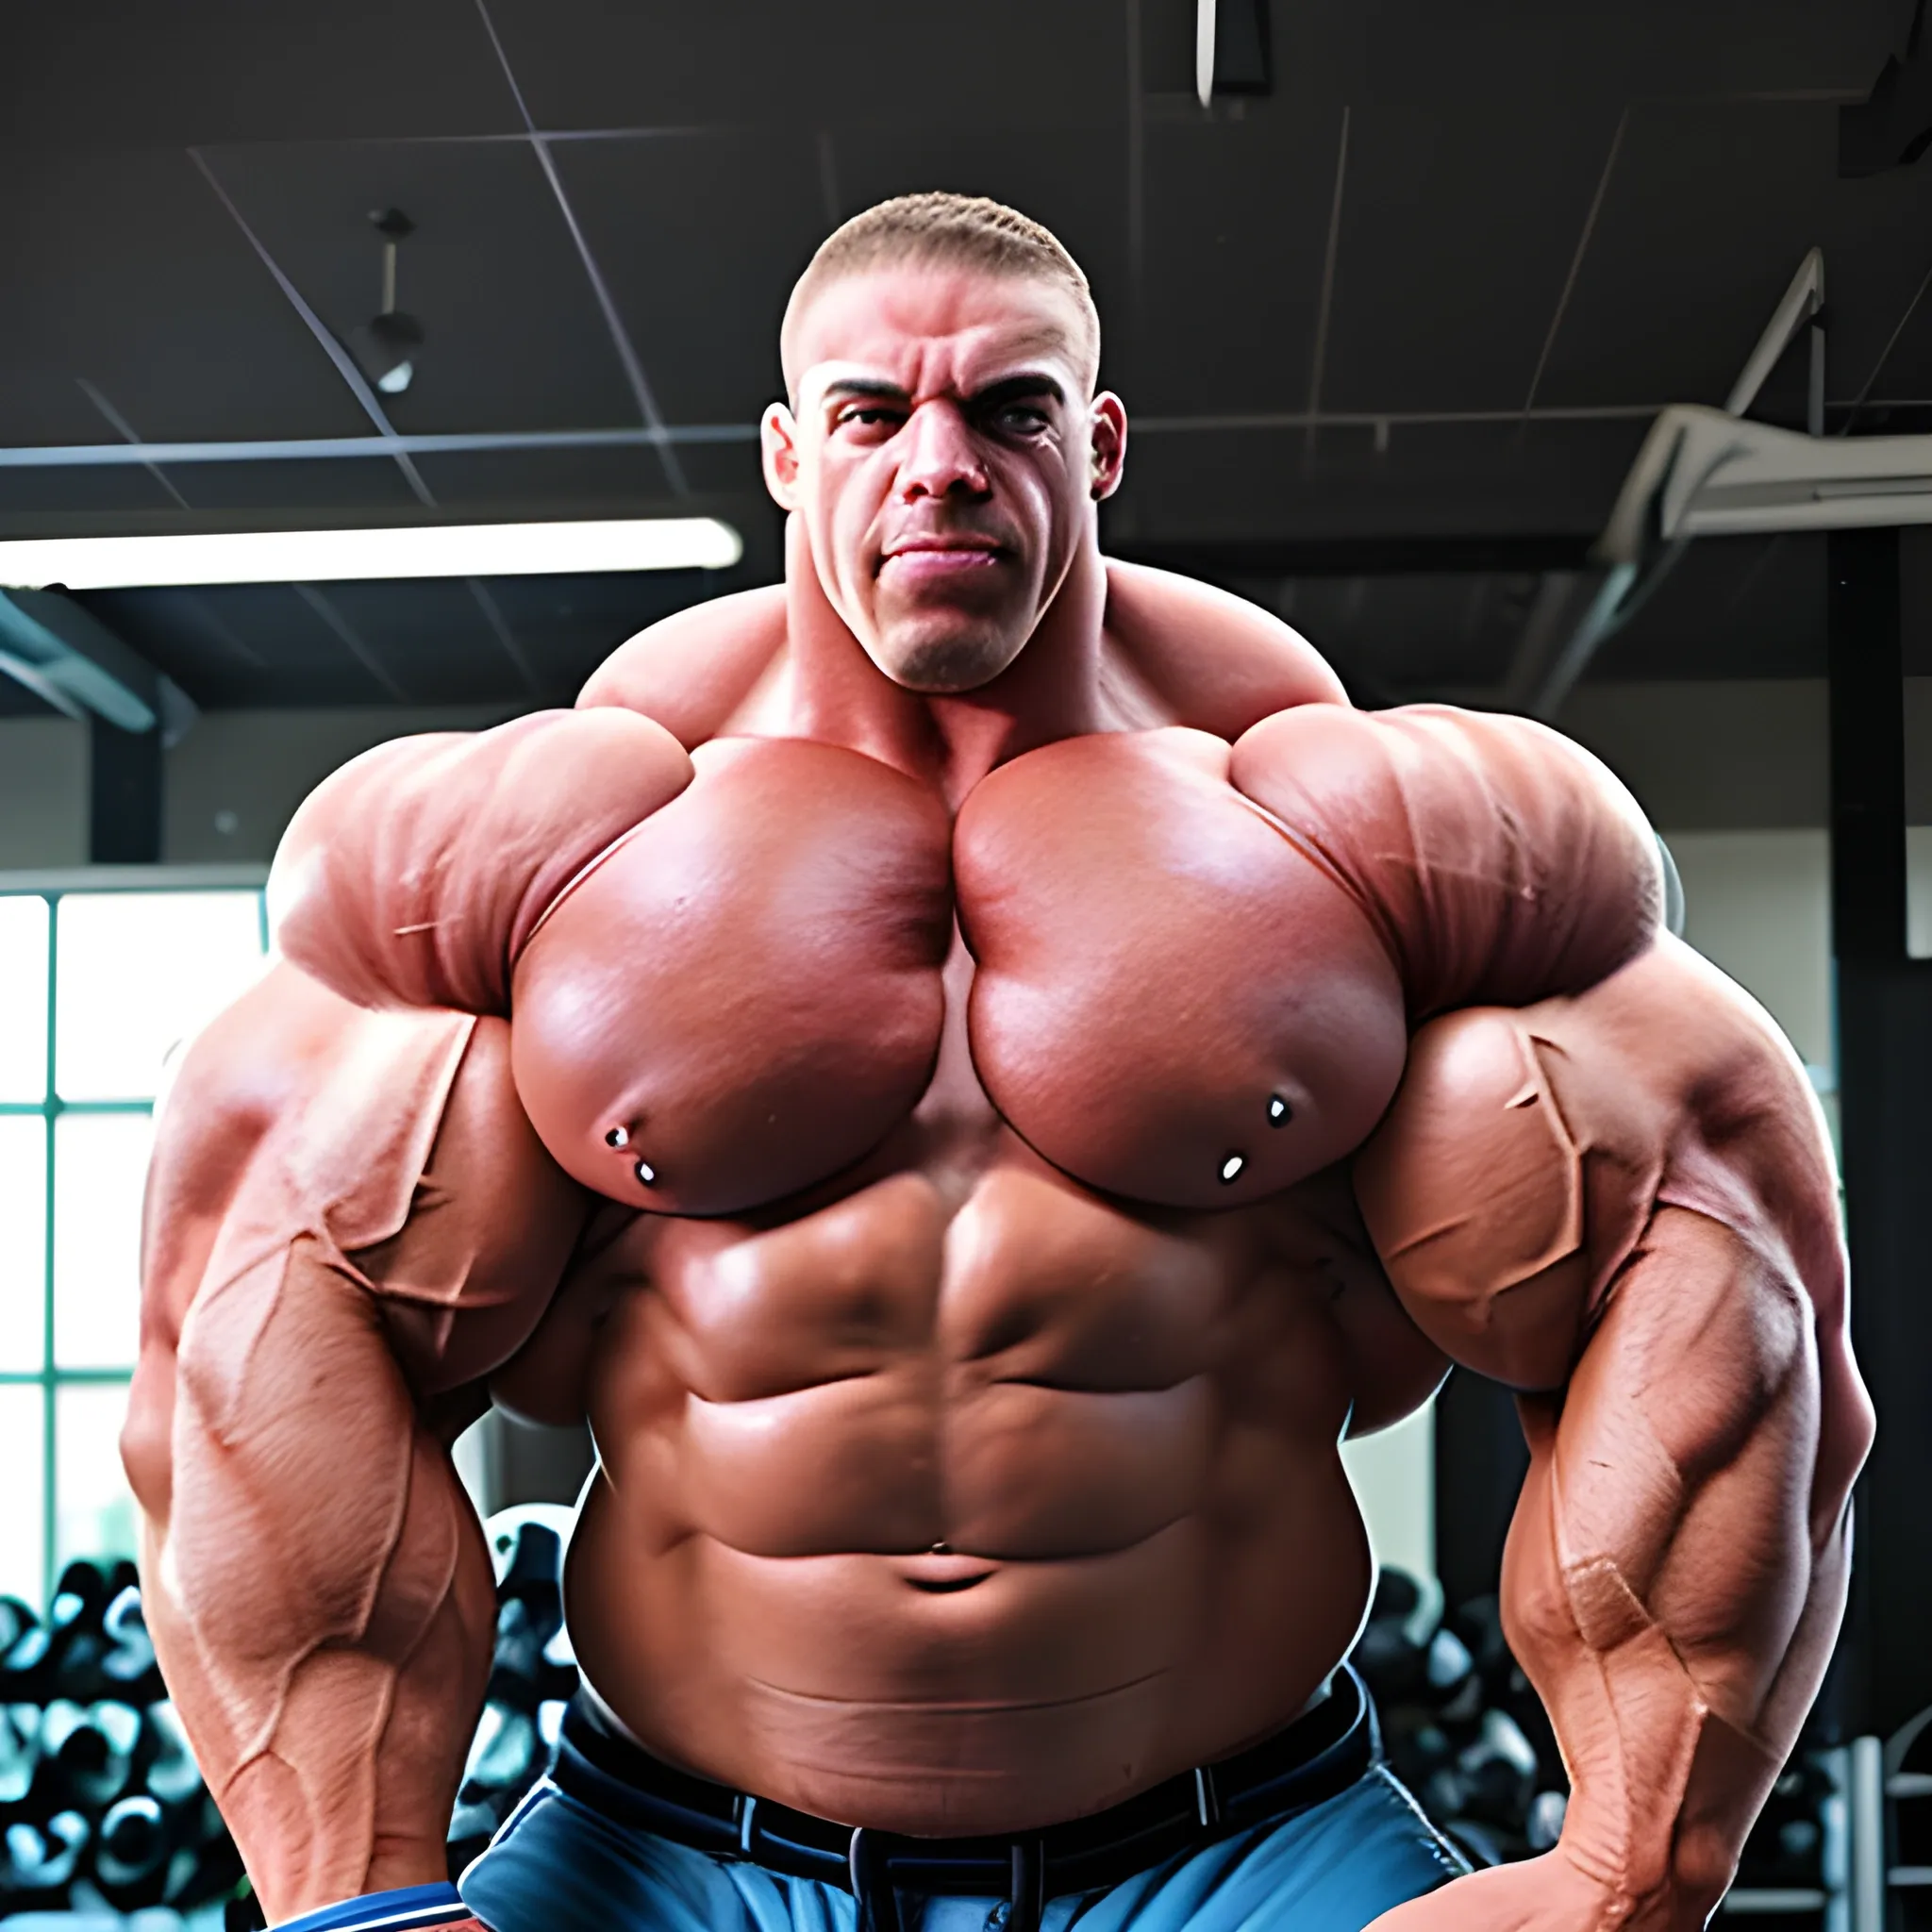 3-meters, beaatiful muscle morph, 3000 lbs bodybuilder, gigantic 300 inches biceps, huge biceps, extremely huge muscular arms, 300 inches enormous triceps, enormous forearms, gigantic traps, 300 inches chest, 
